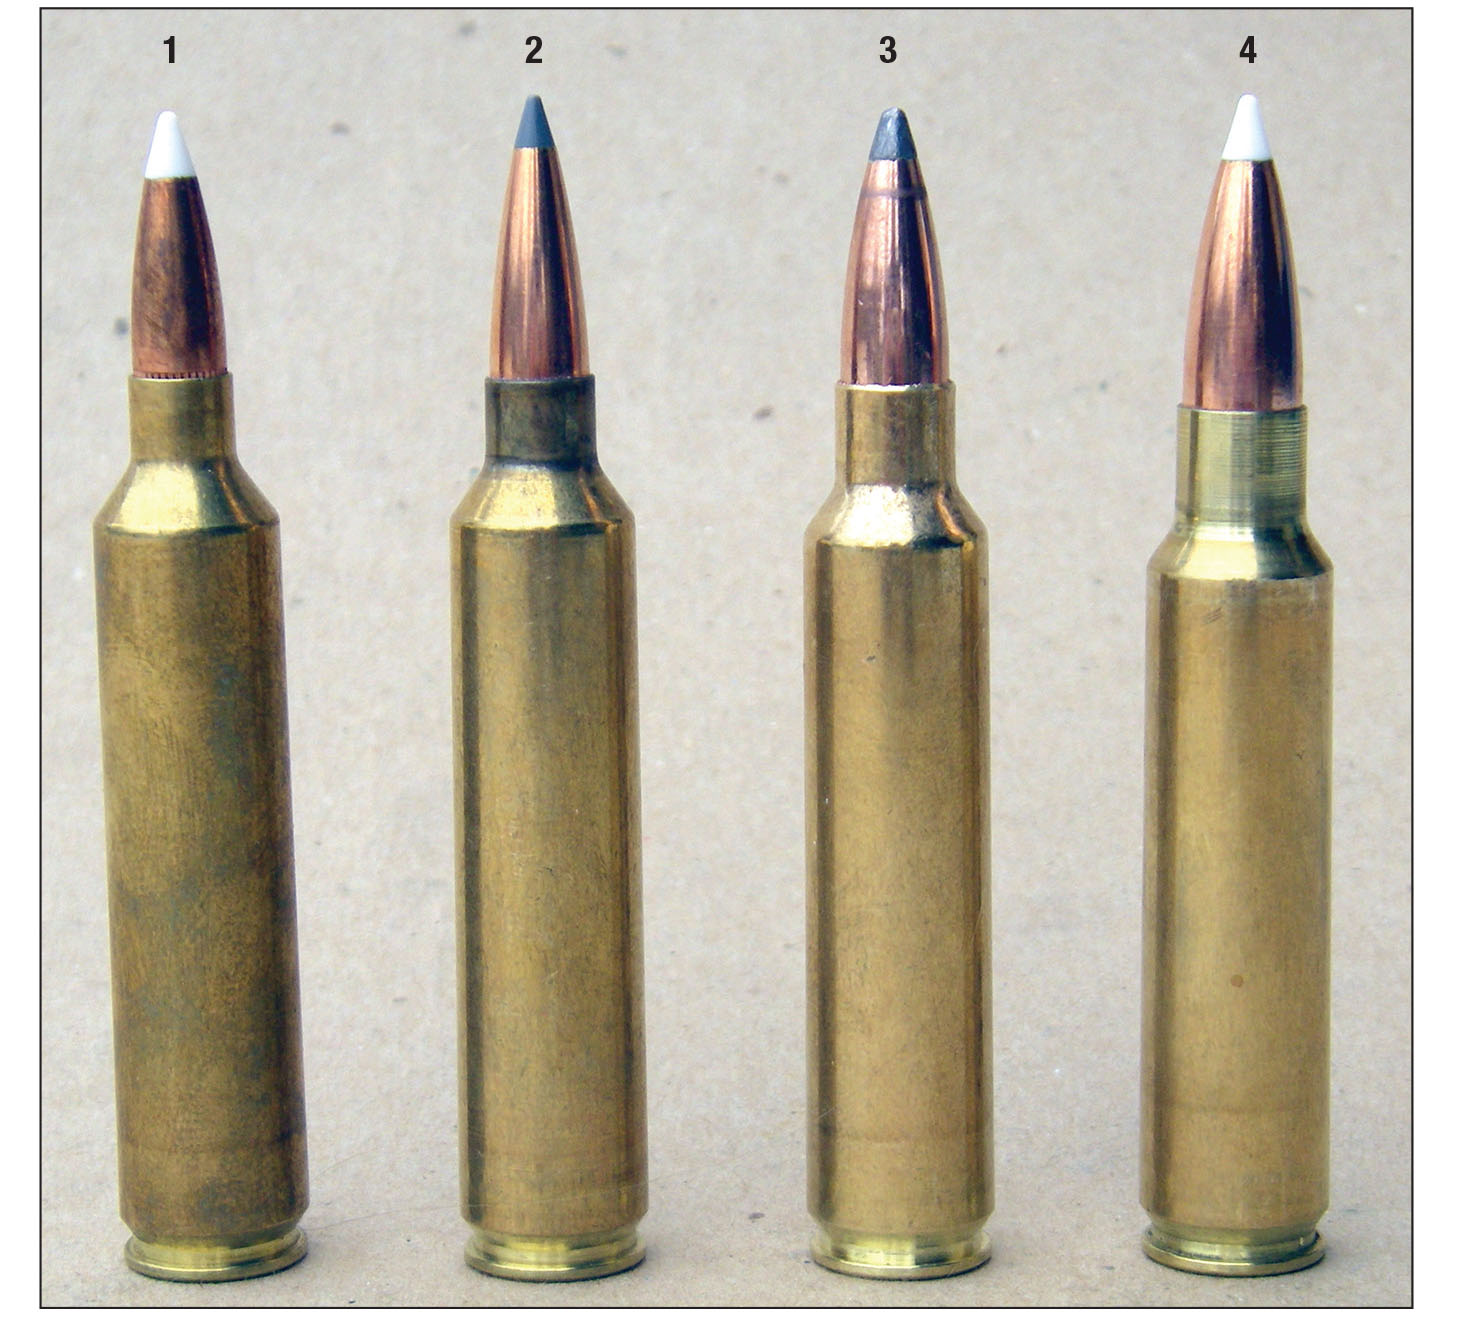 Nosler cartridges include (left to right): .26, .28, .30 and .33. Note the shoulder datum differences between the .26 and .28 compared to the .30 and .33.